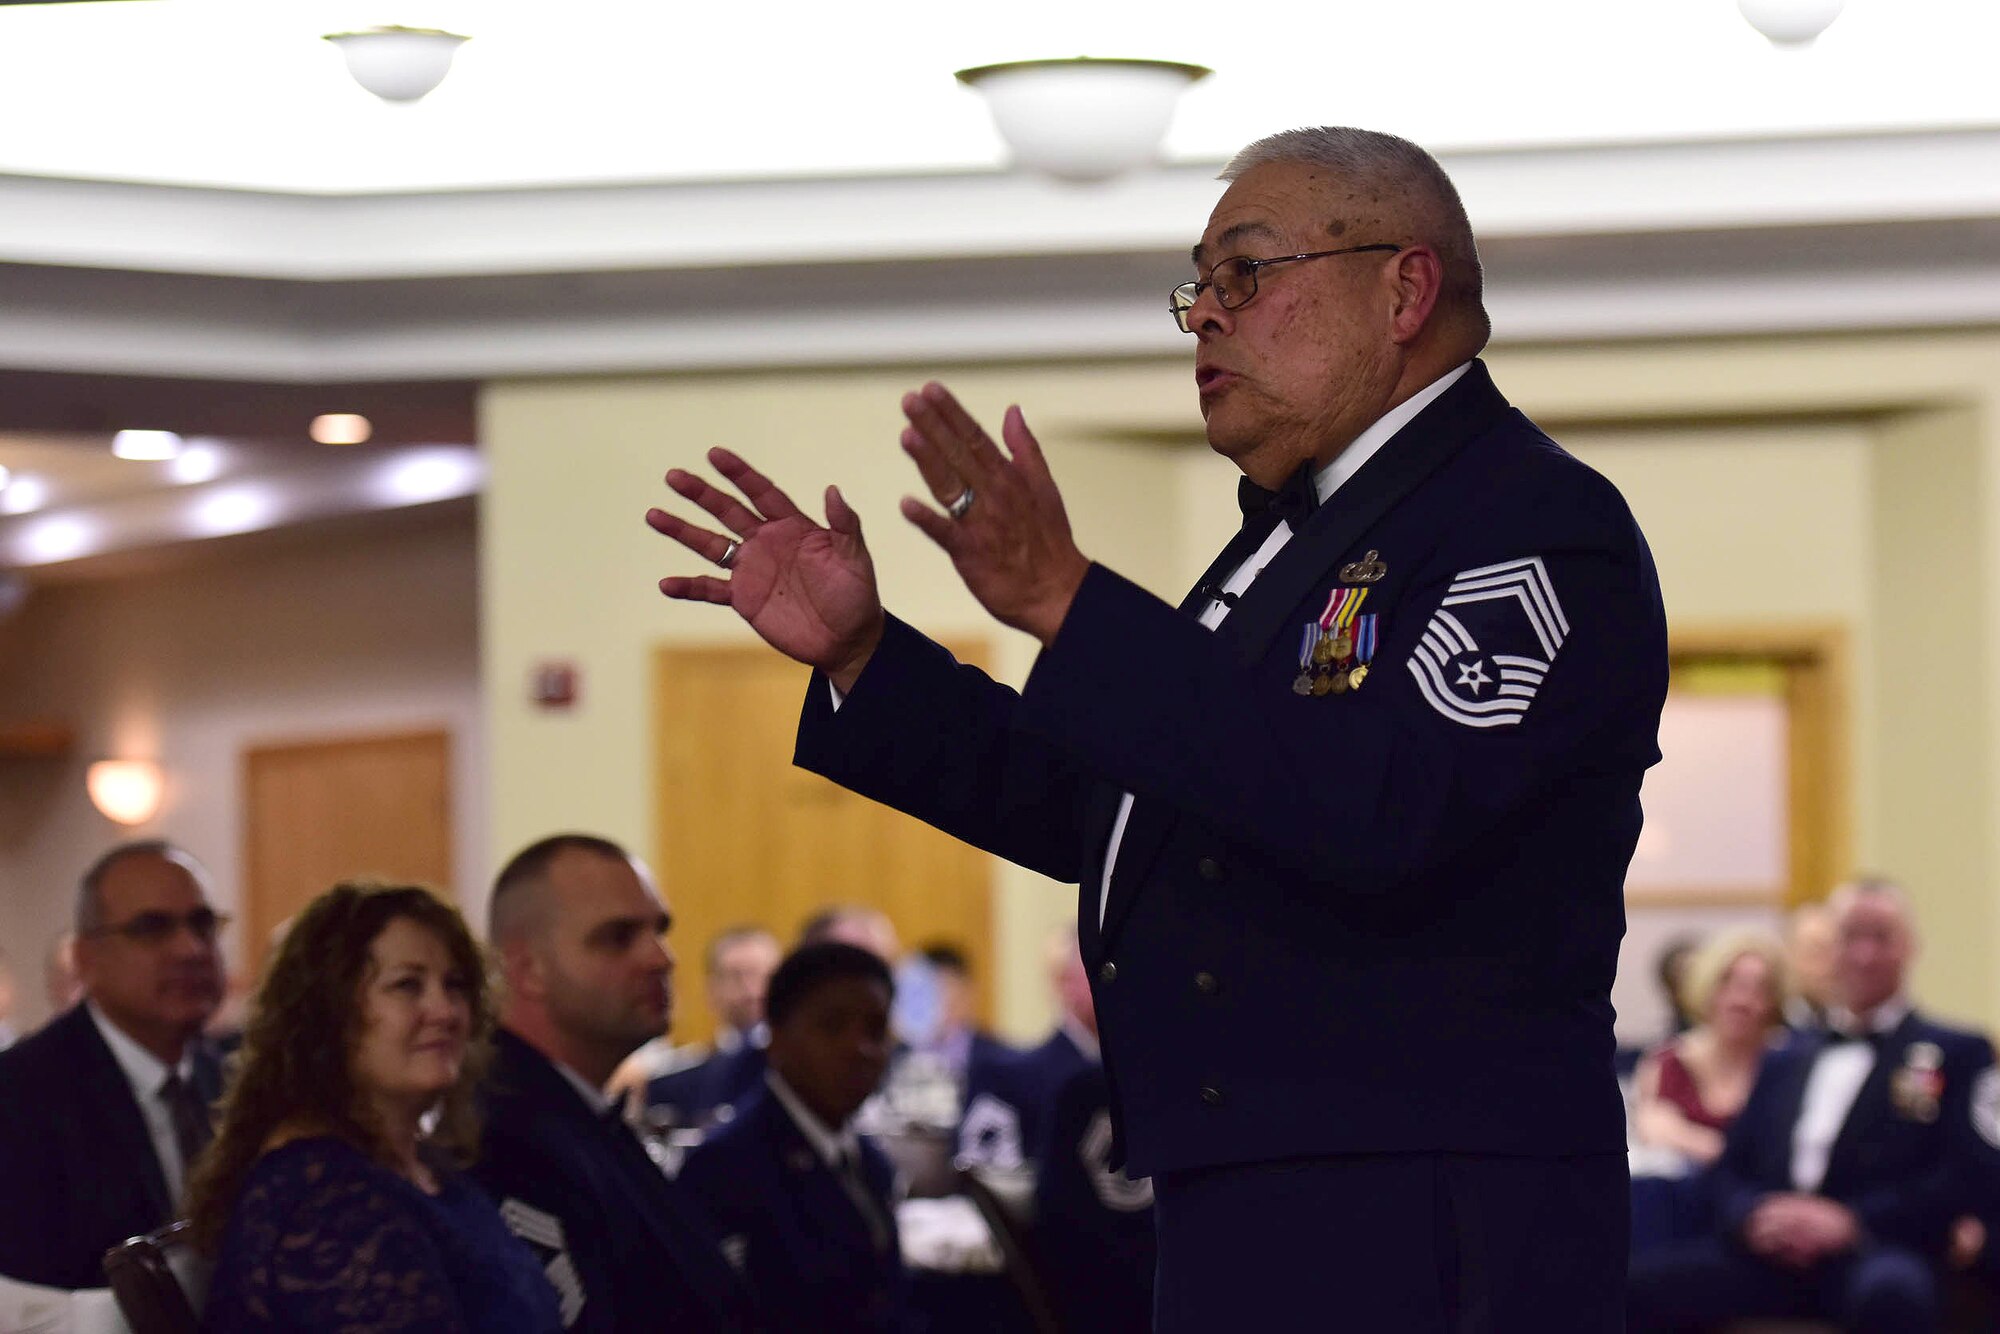 Retired U.S. Air Force Chief Master Sgt. Bob Vasquez, the guest speaker during Whiteman’s 2018 Chief Induction Ceremony, gives a speech about leadership and mentorship at Whiteman Air Force Base, Mo., March 16, 2018.